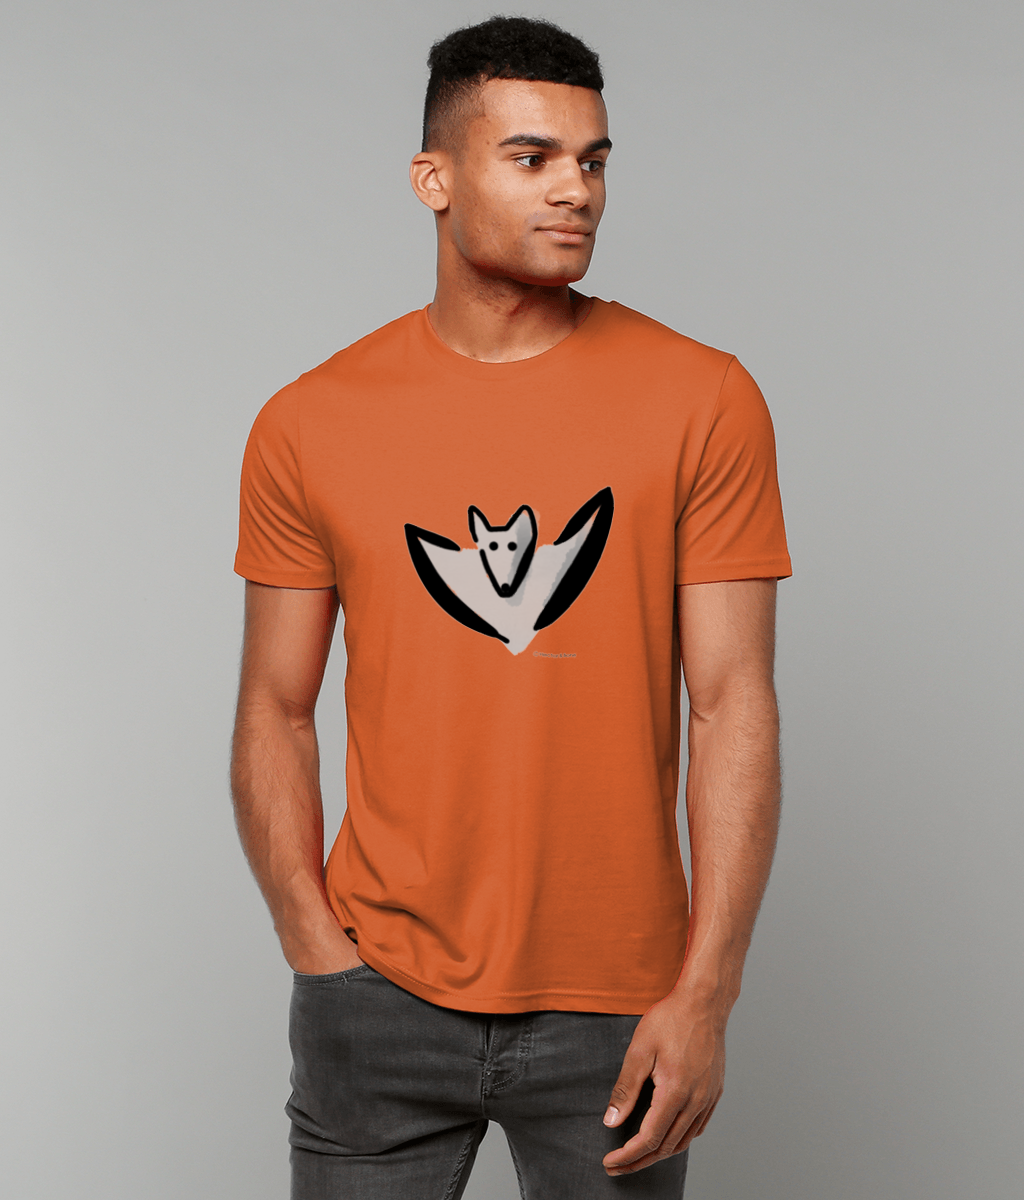 Bat T-shirt - Young man wearing illustrated Bertie Bat T-shirt in bright orange colour vegan cotton - T-shirts by Hector and Bone